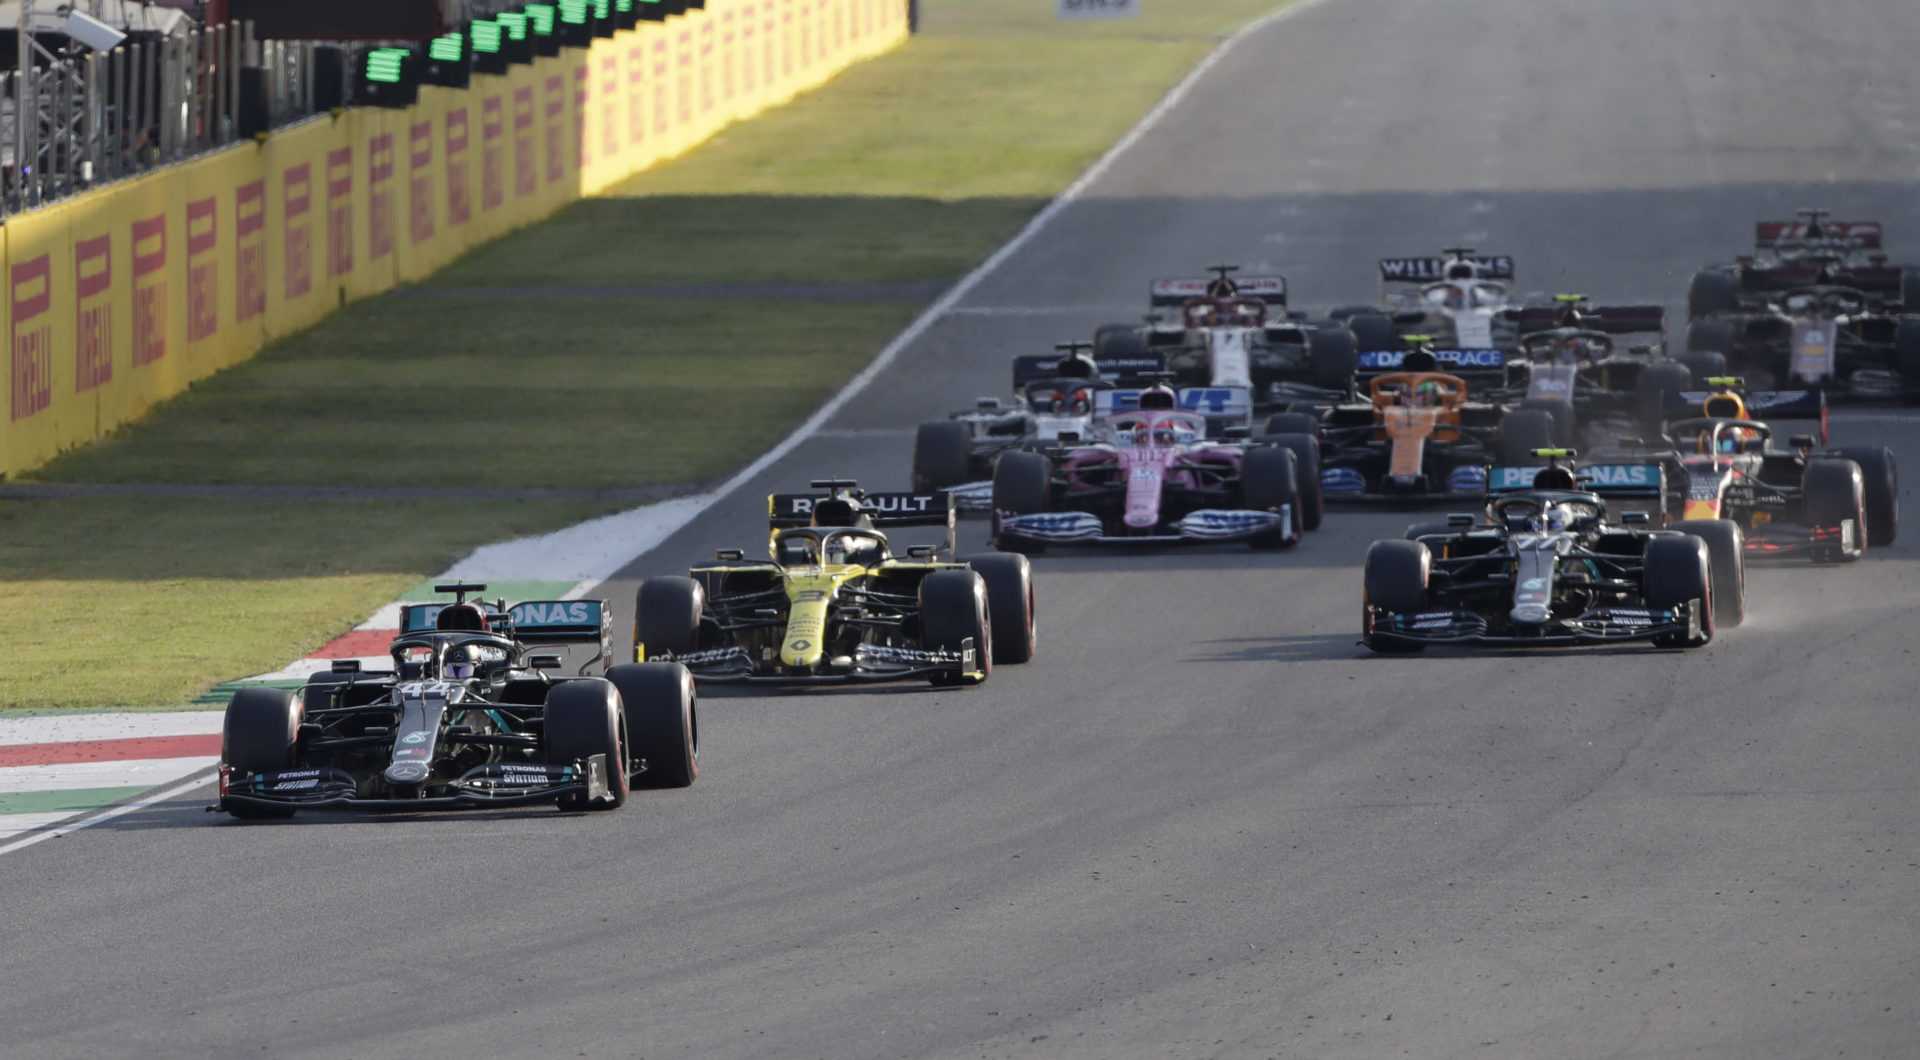 What are Reverse Grid Races and Why Have They Divided the F1 World?